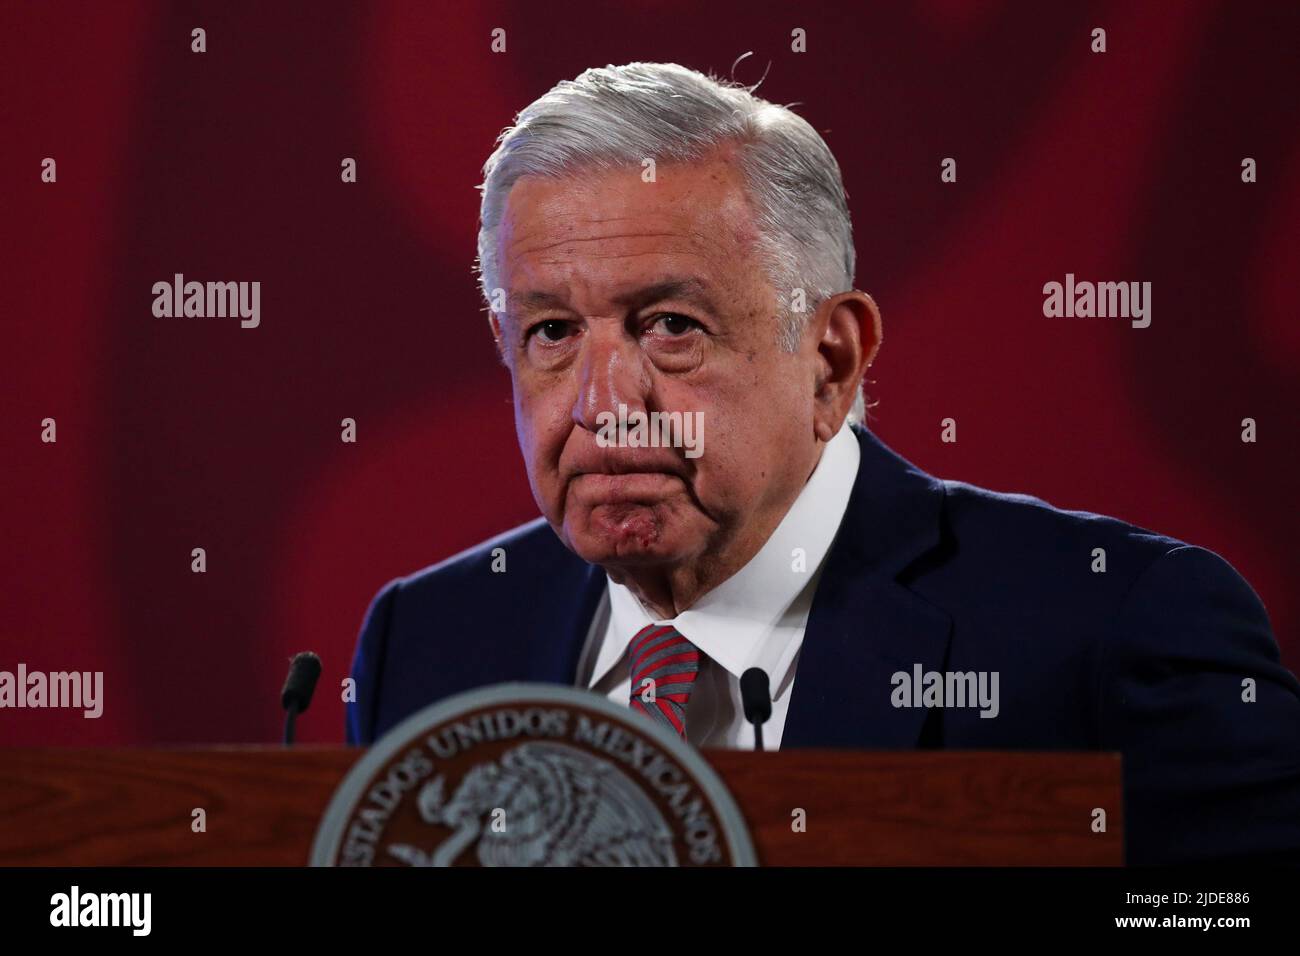 Mexico's President Andres Manuel Lopez Obrador gestures during a news conference at the National Palace in Mexico City, Mexico, June 20, 2022. REUTERS/Edgard Garrido Stock Photo